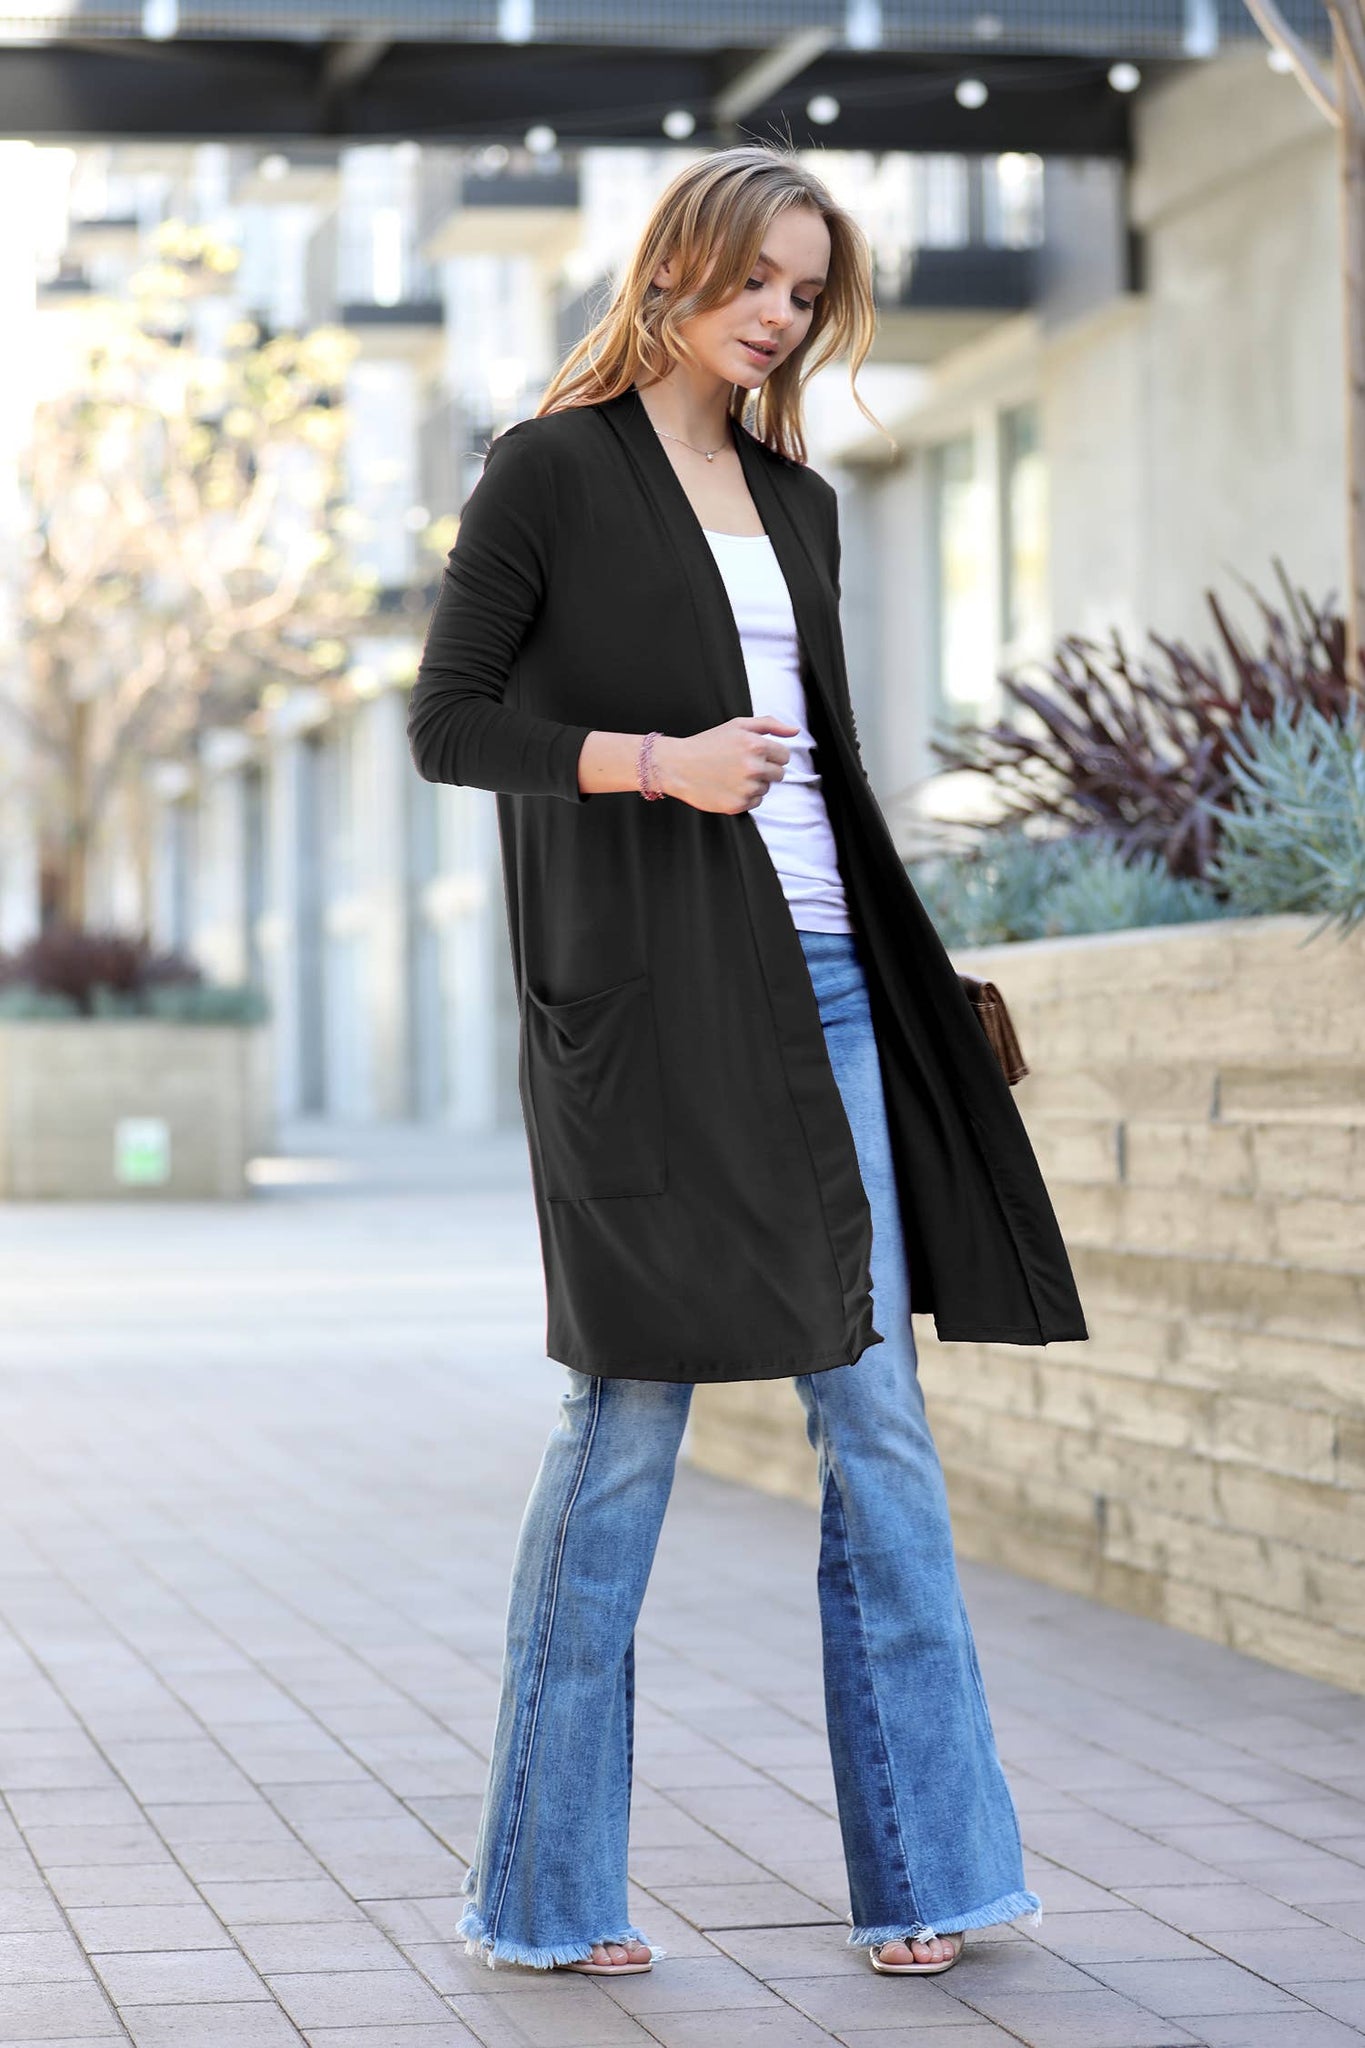 Slouchy Cardigan with Pockets in Black